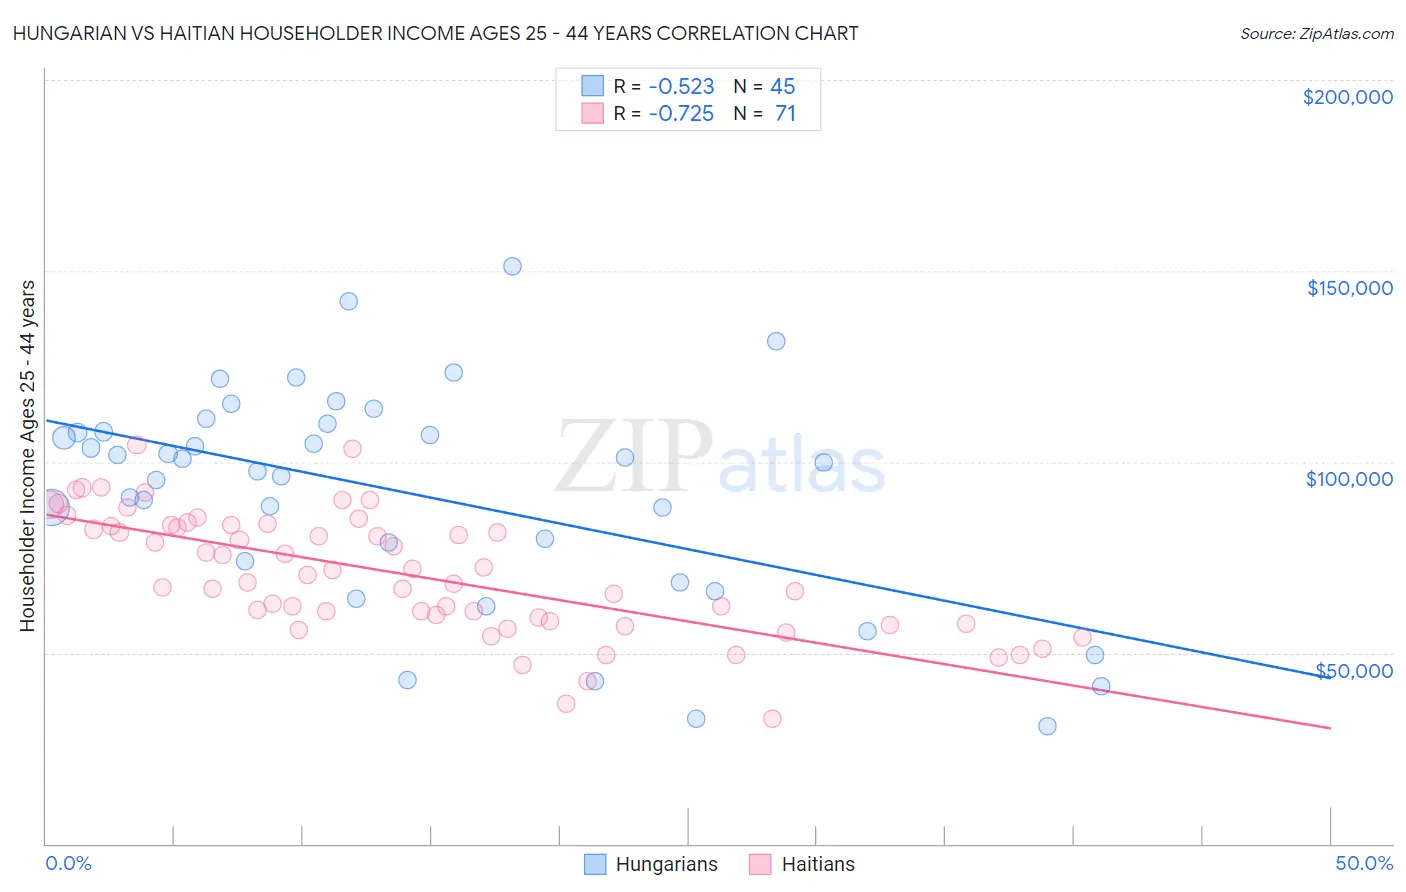 Hungarian vs Haitian Householder Income Ages 25 - 44 years